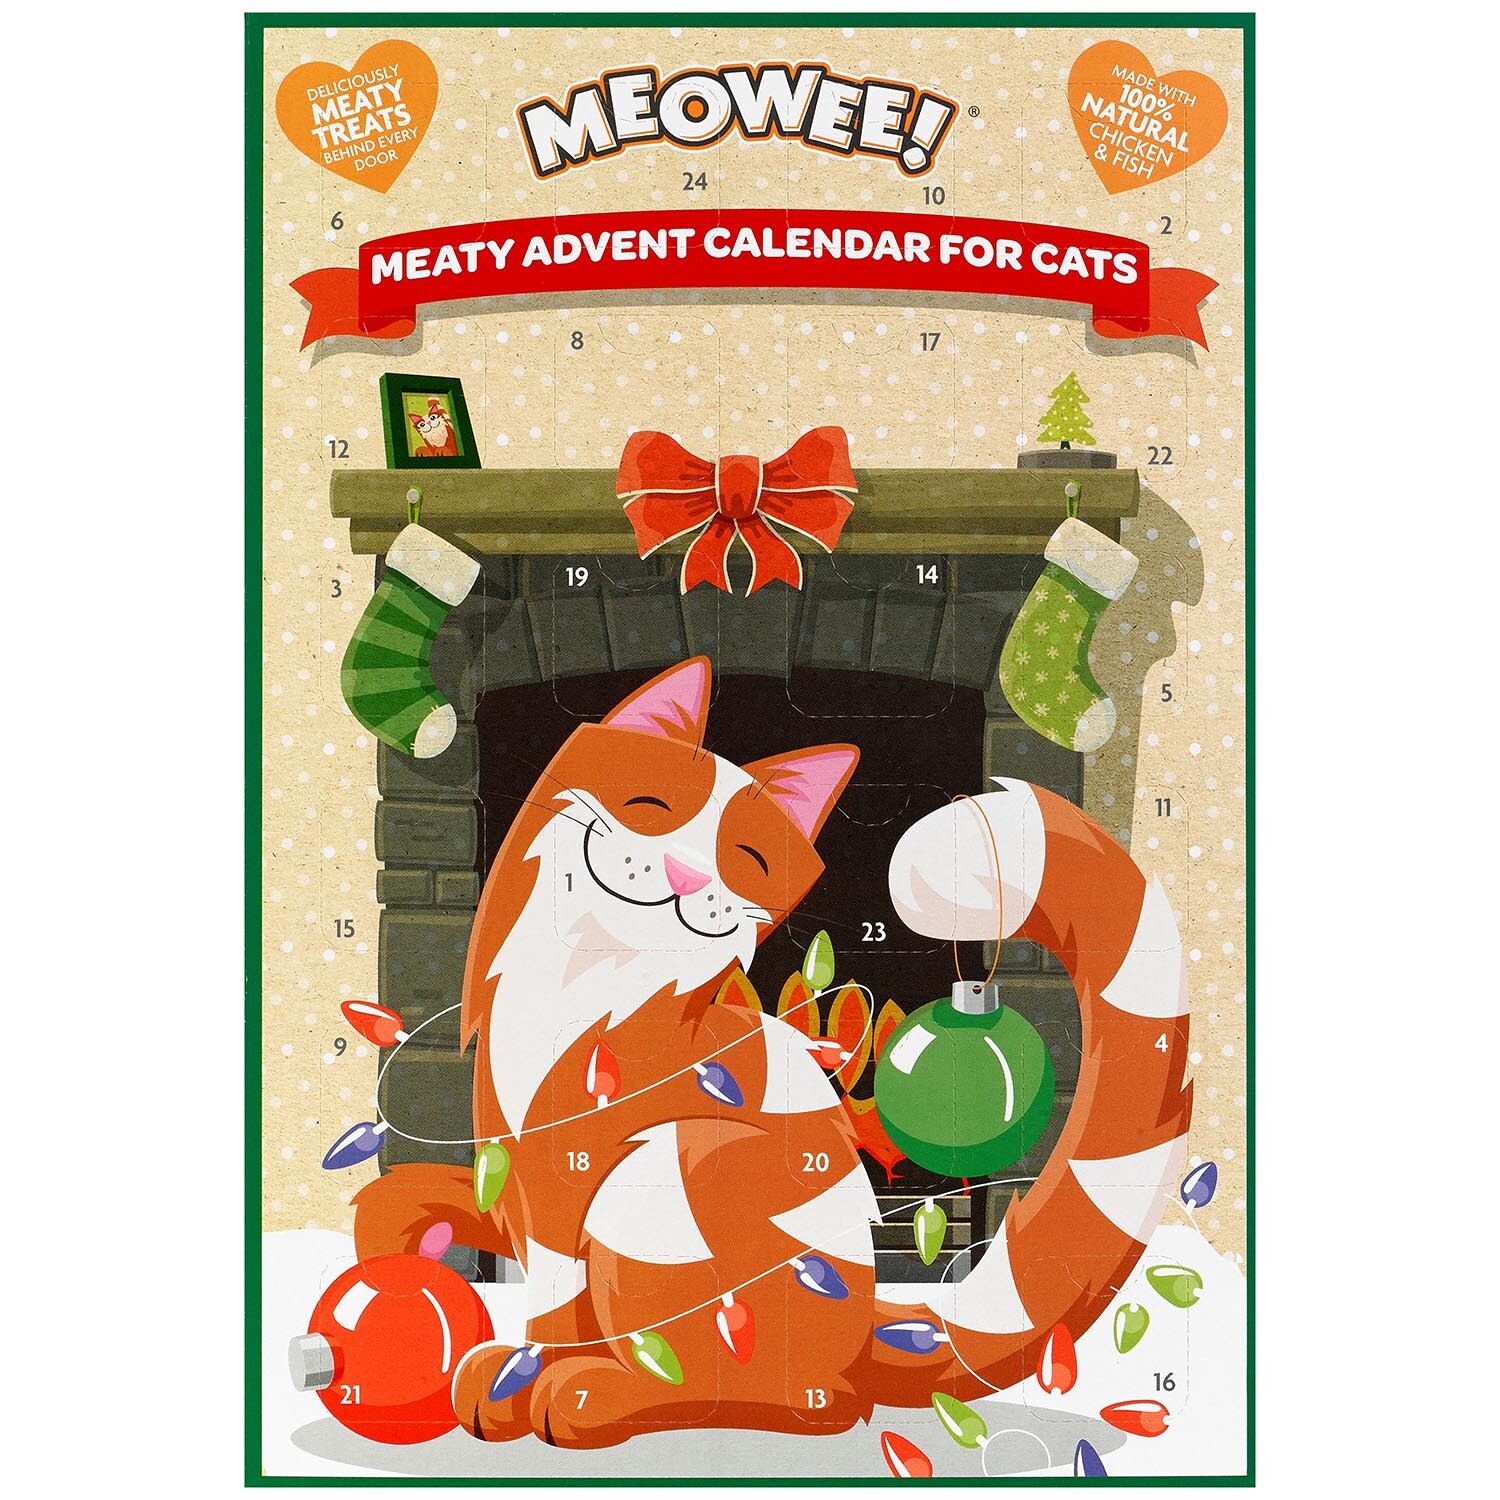 Meowee Meaty Advent Calendar for Cats Image